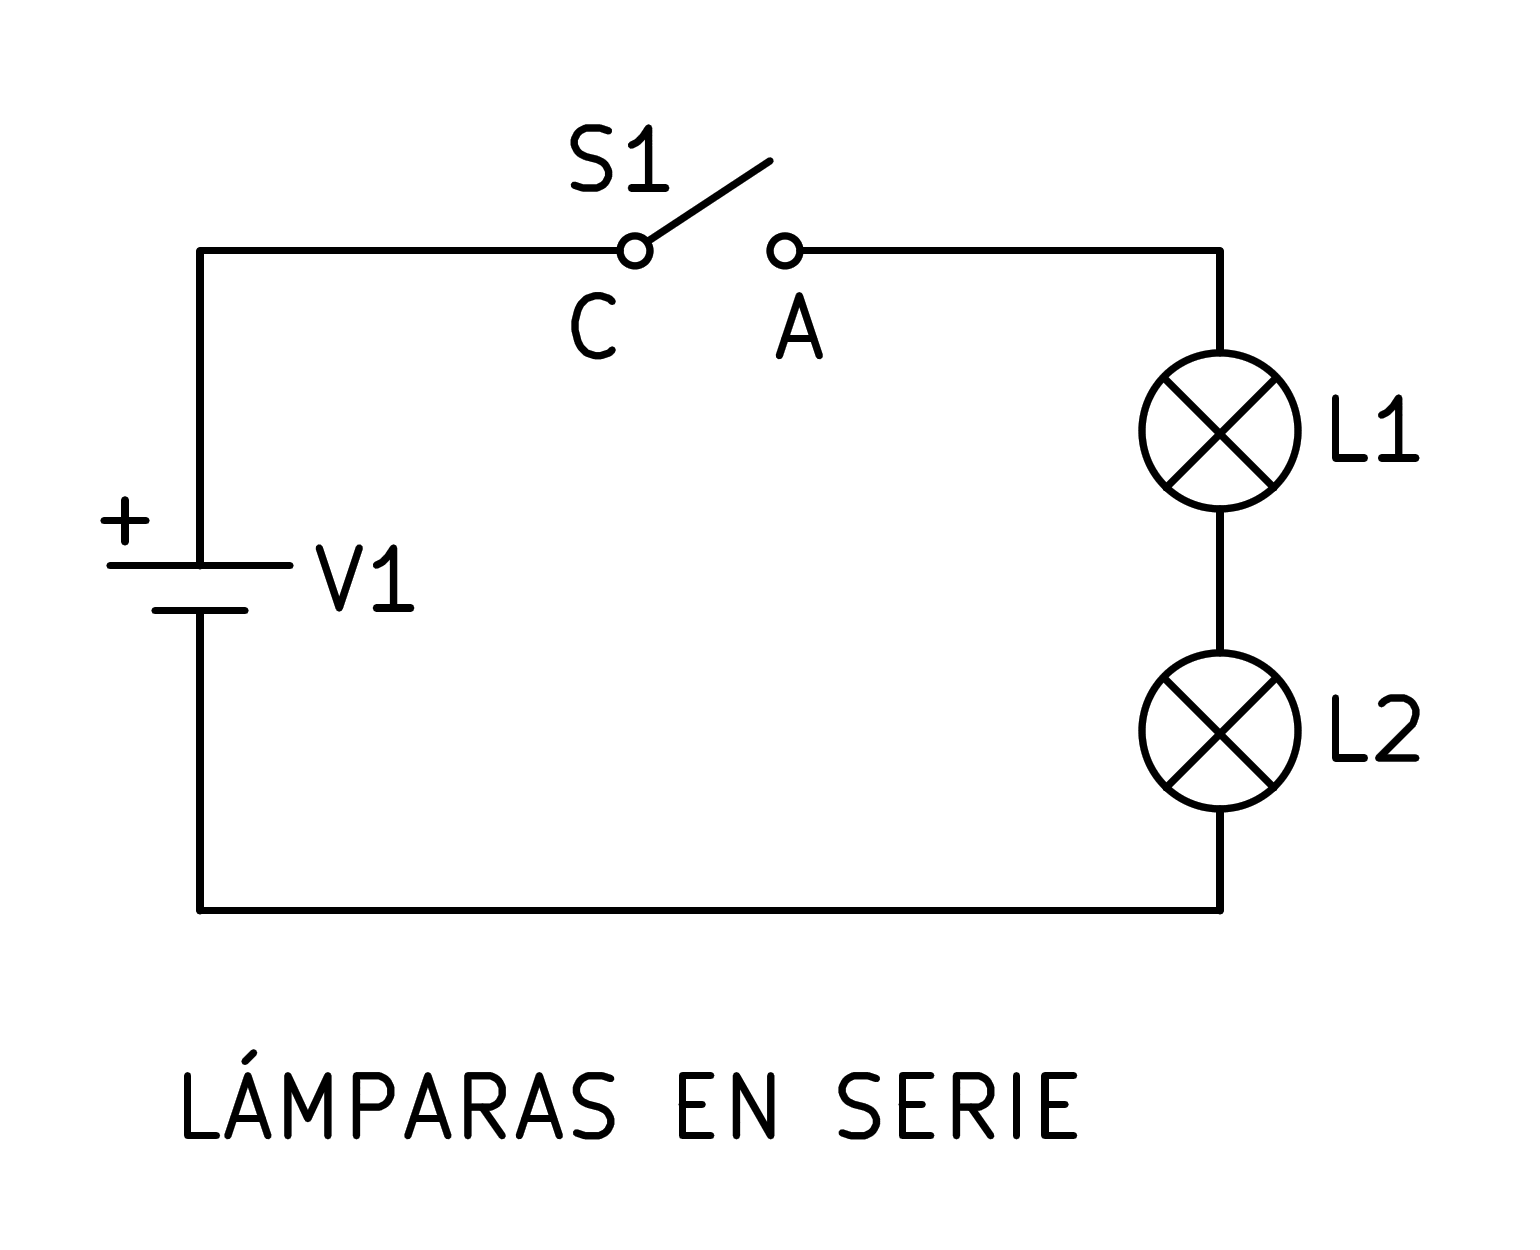 _images/electric-bornas-lamparas-serie.png